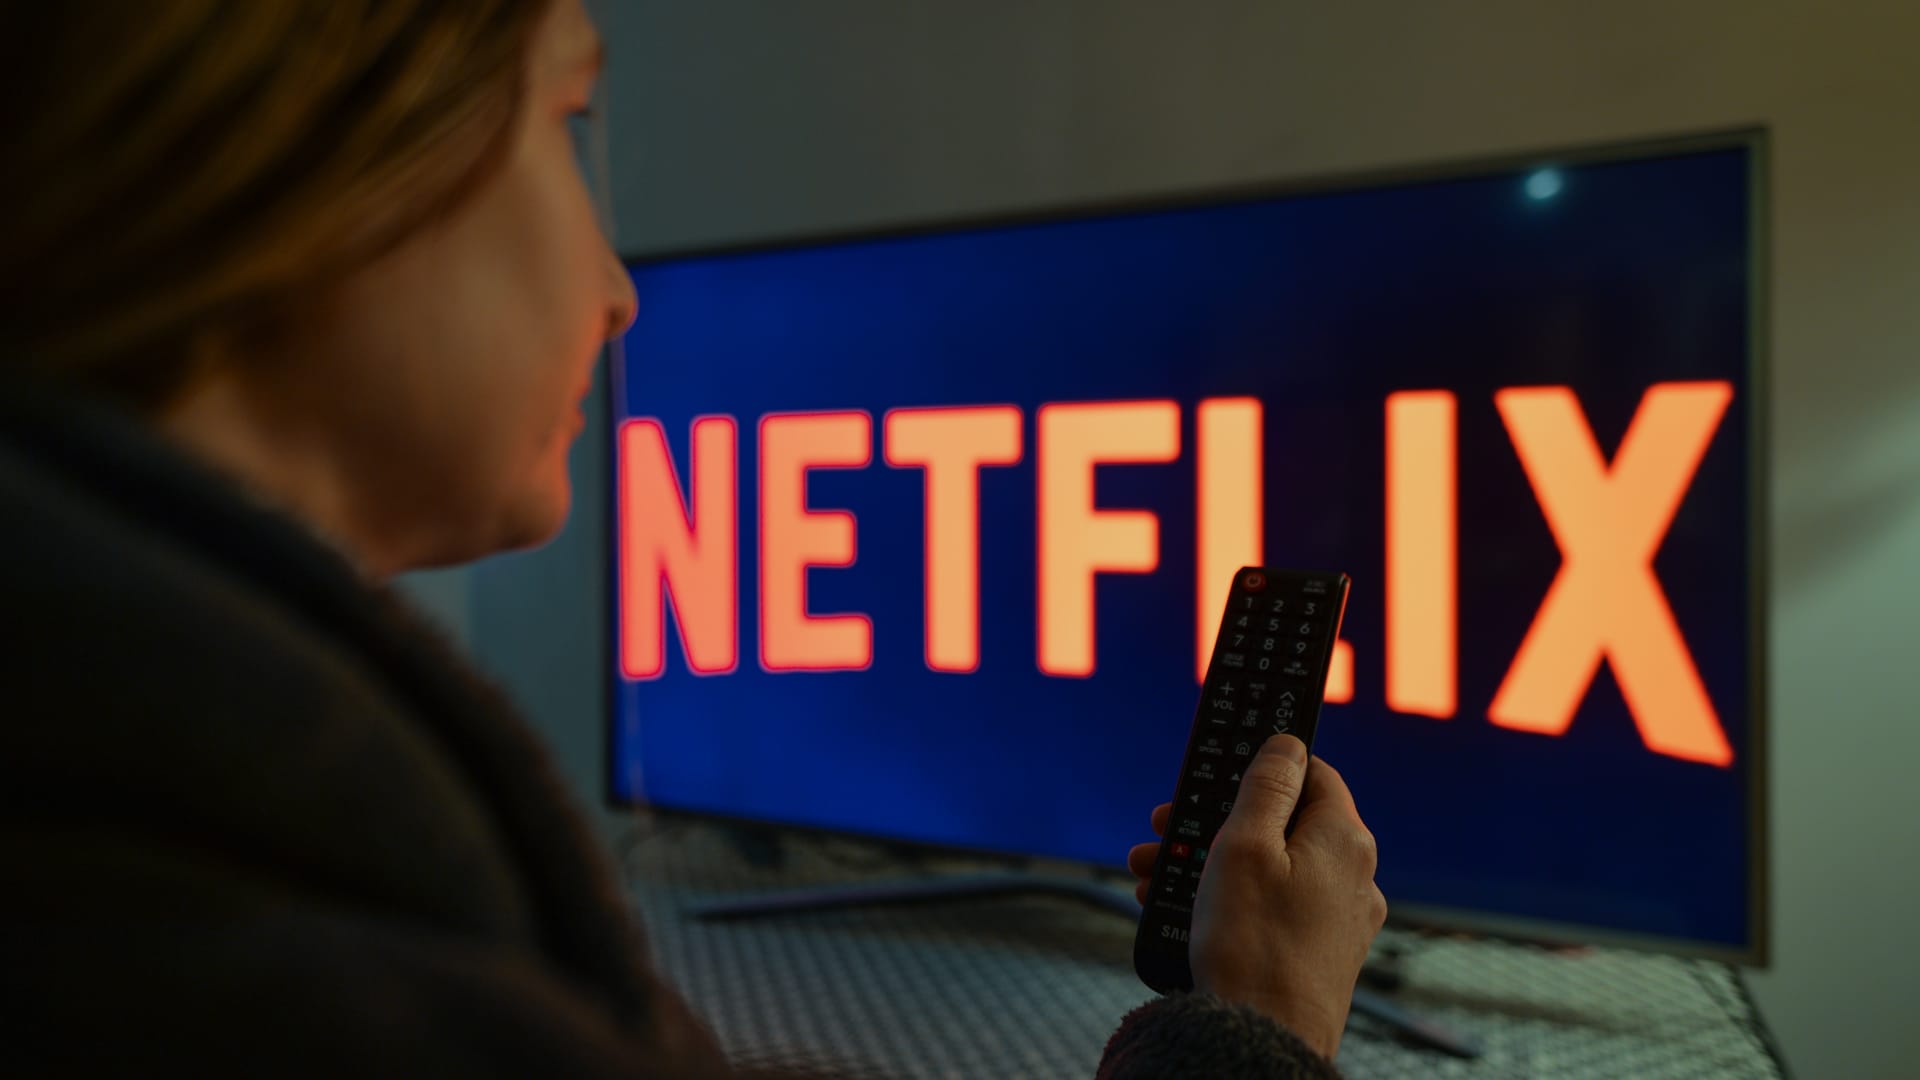 Netflix stock surges 16% after Wall Street buys into ad-driven subscriber growth